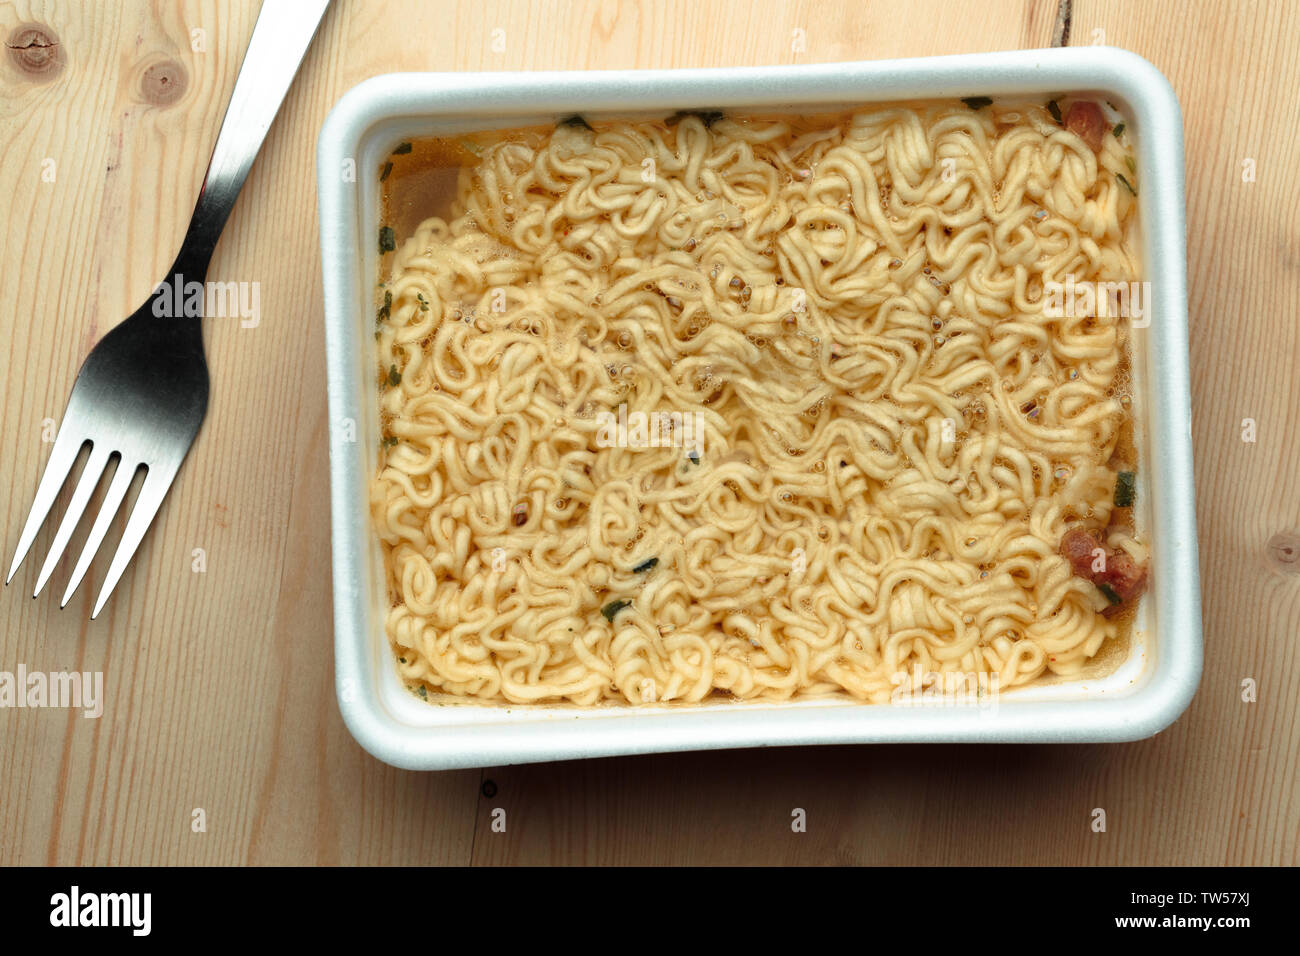 Nourishing noodles on a wooden table in a disposable plate. Stock Photo